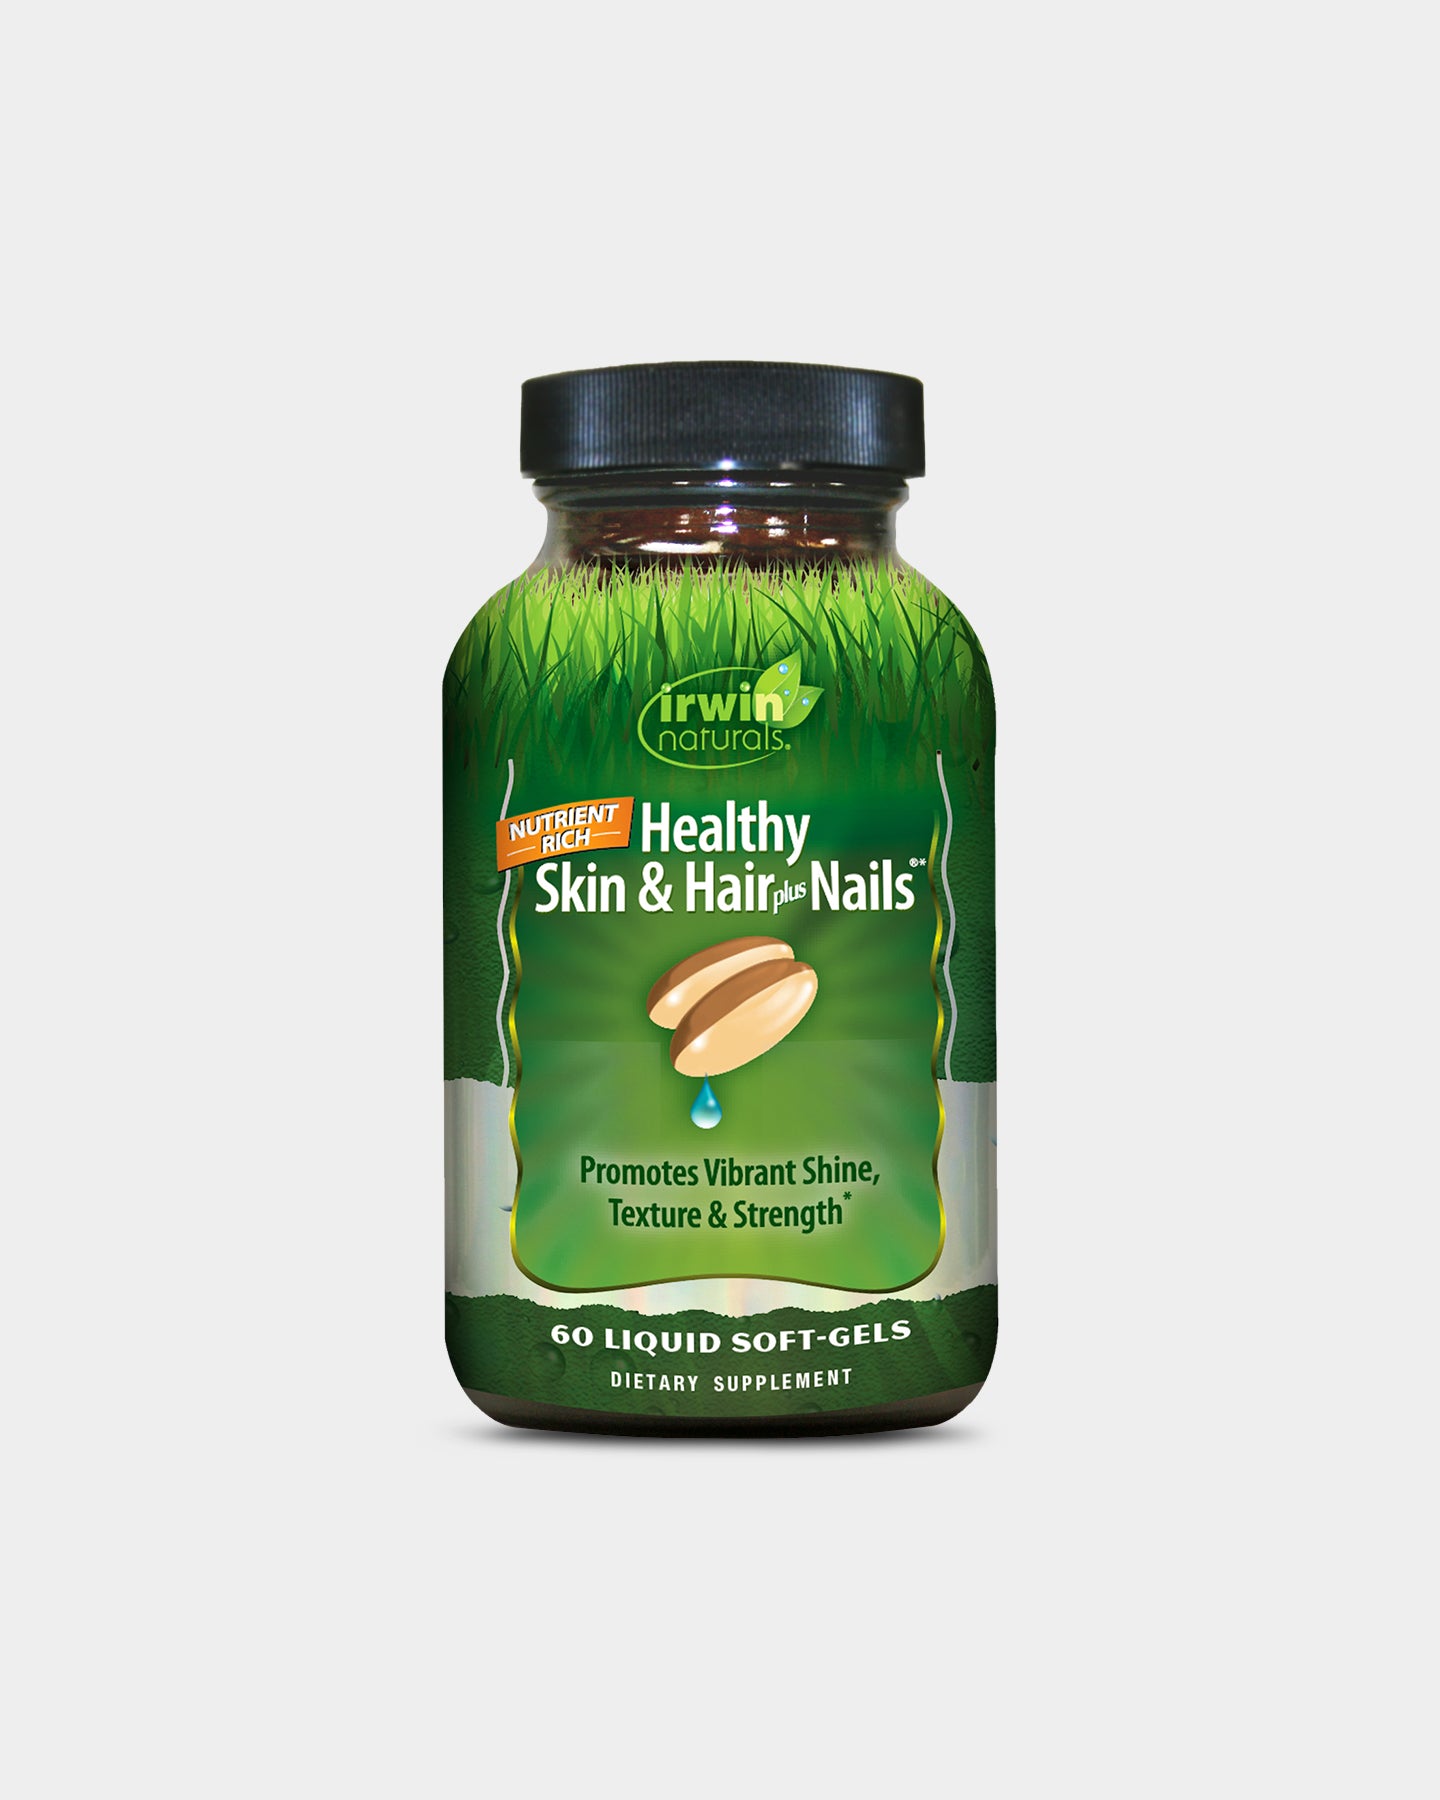 Image of Irwin Naturals Healthy Skin & Hair Plus Nails